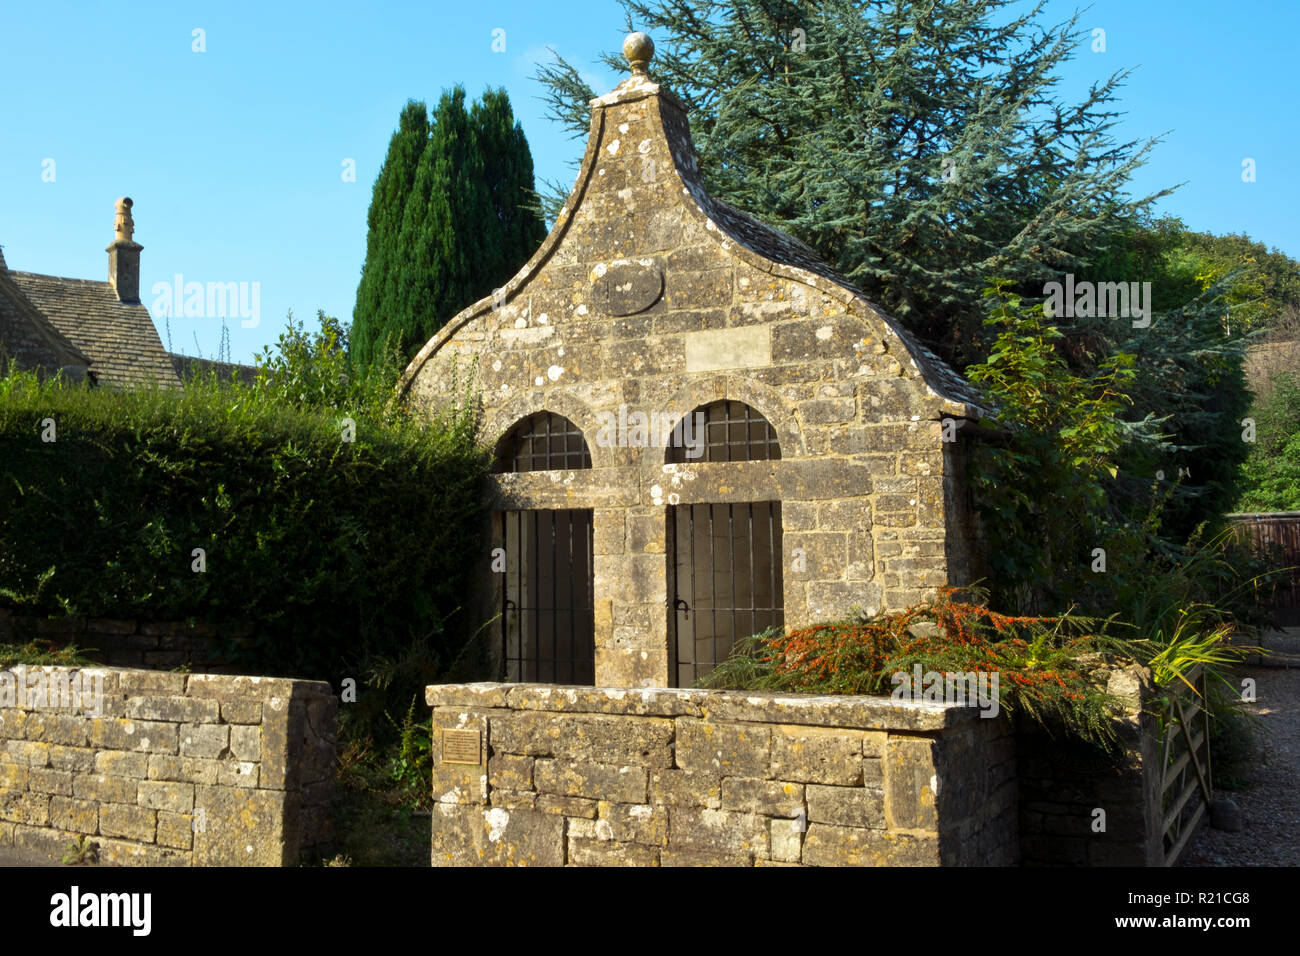 The Old Lock Up, Bisley, Cotswolds, Gloucestershire, UK. Built in 1824, a two-cell lock-up where drunks were kept overnight. Stock Photo